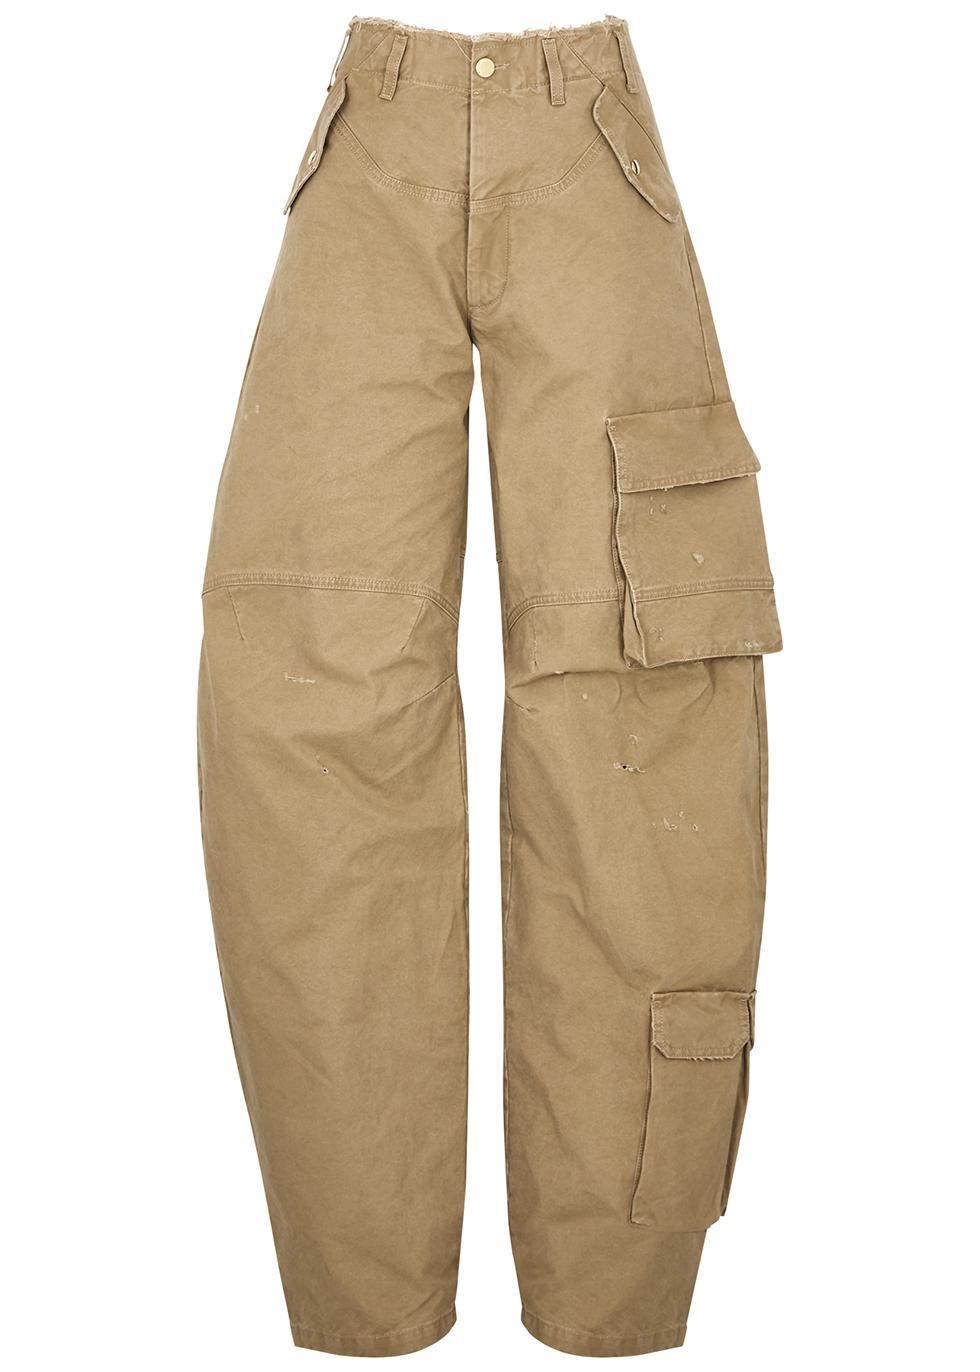 Rosalind camel cotton cargo trousers by DARKPARK